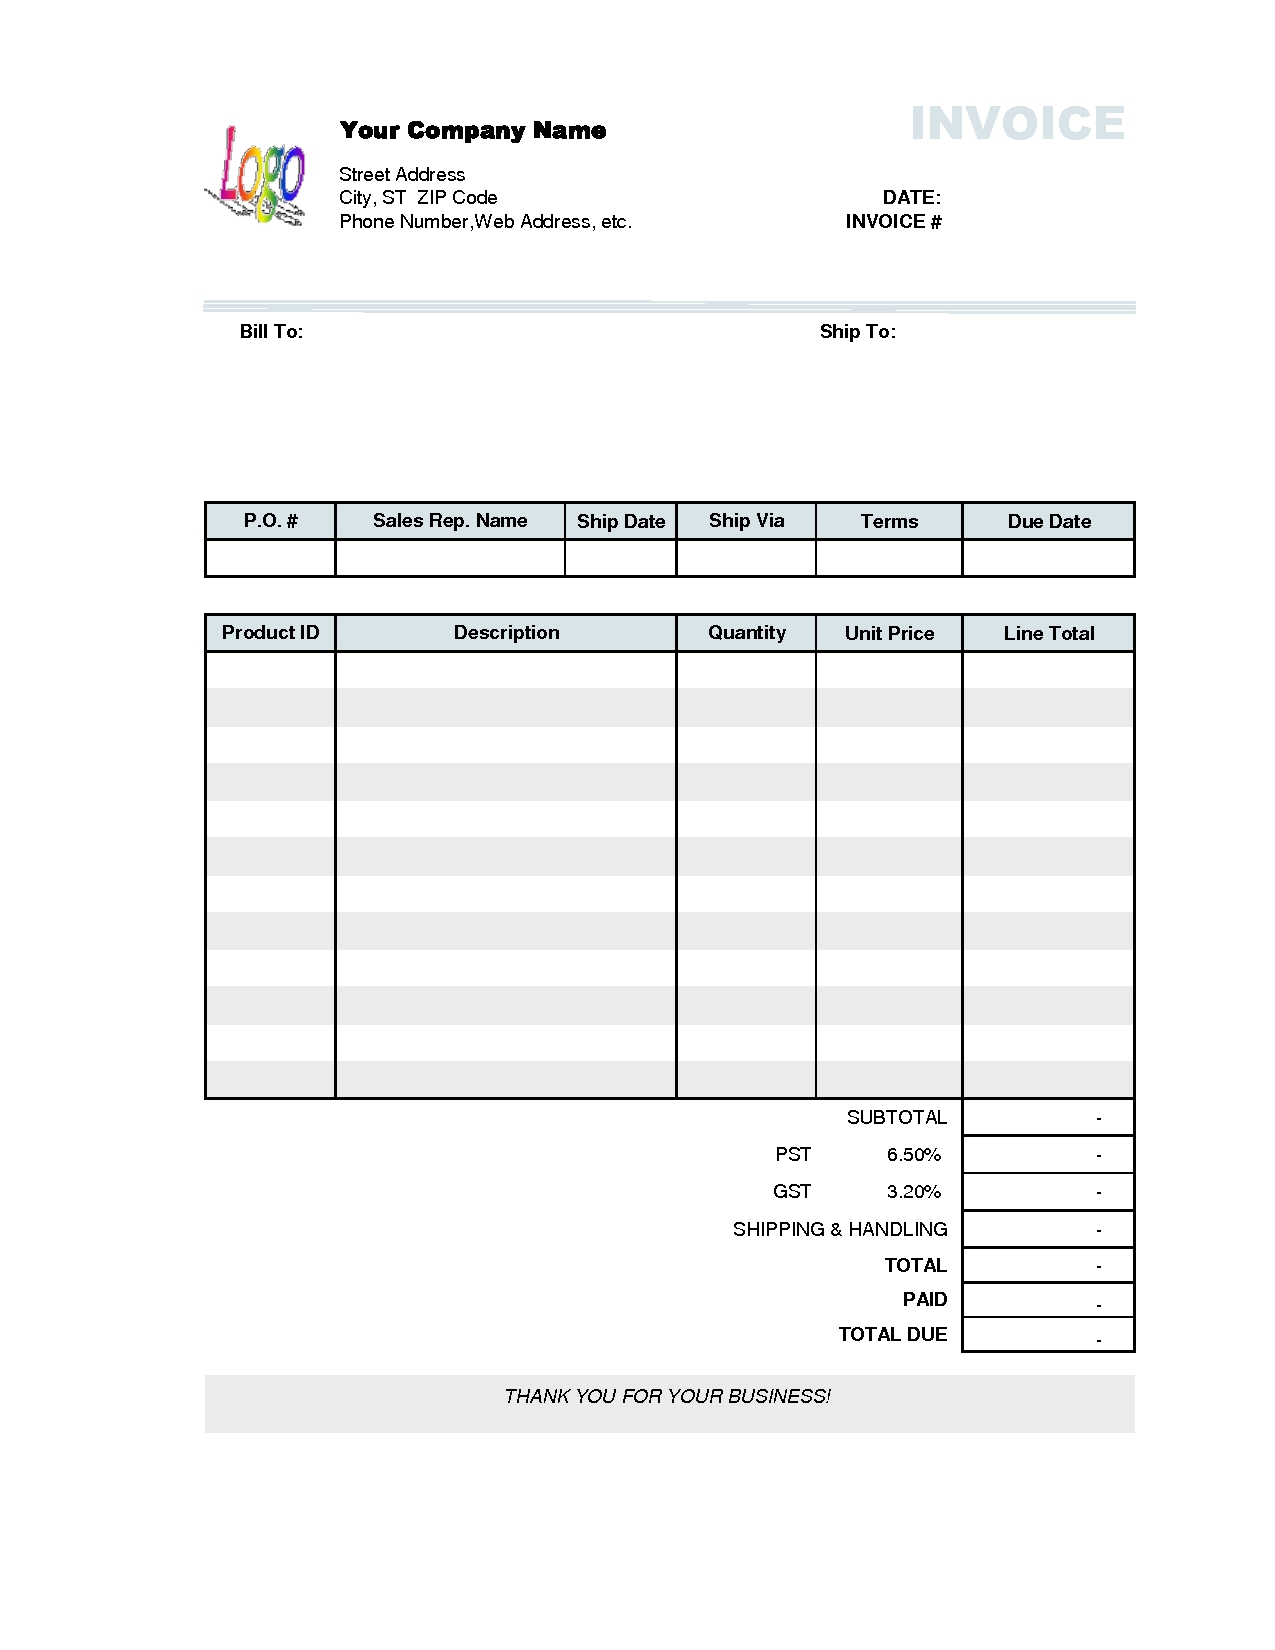 free invoice forms templates all about template free invoice forms online